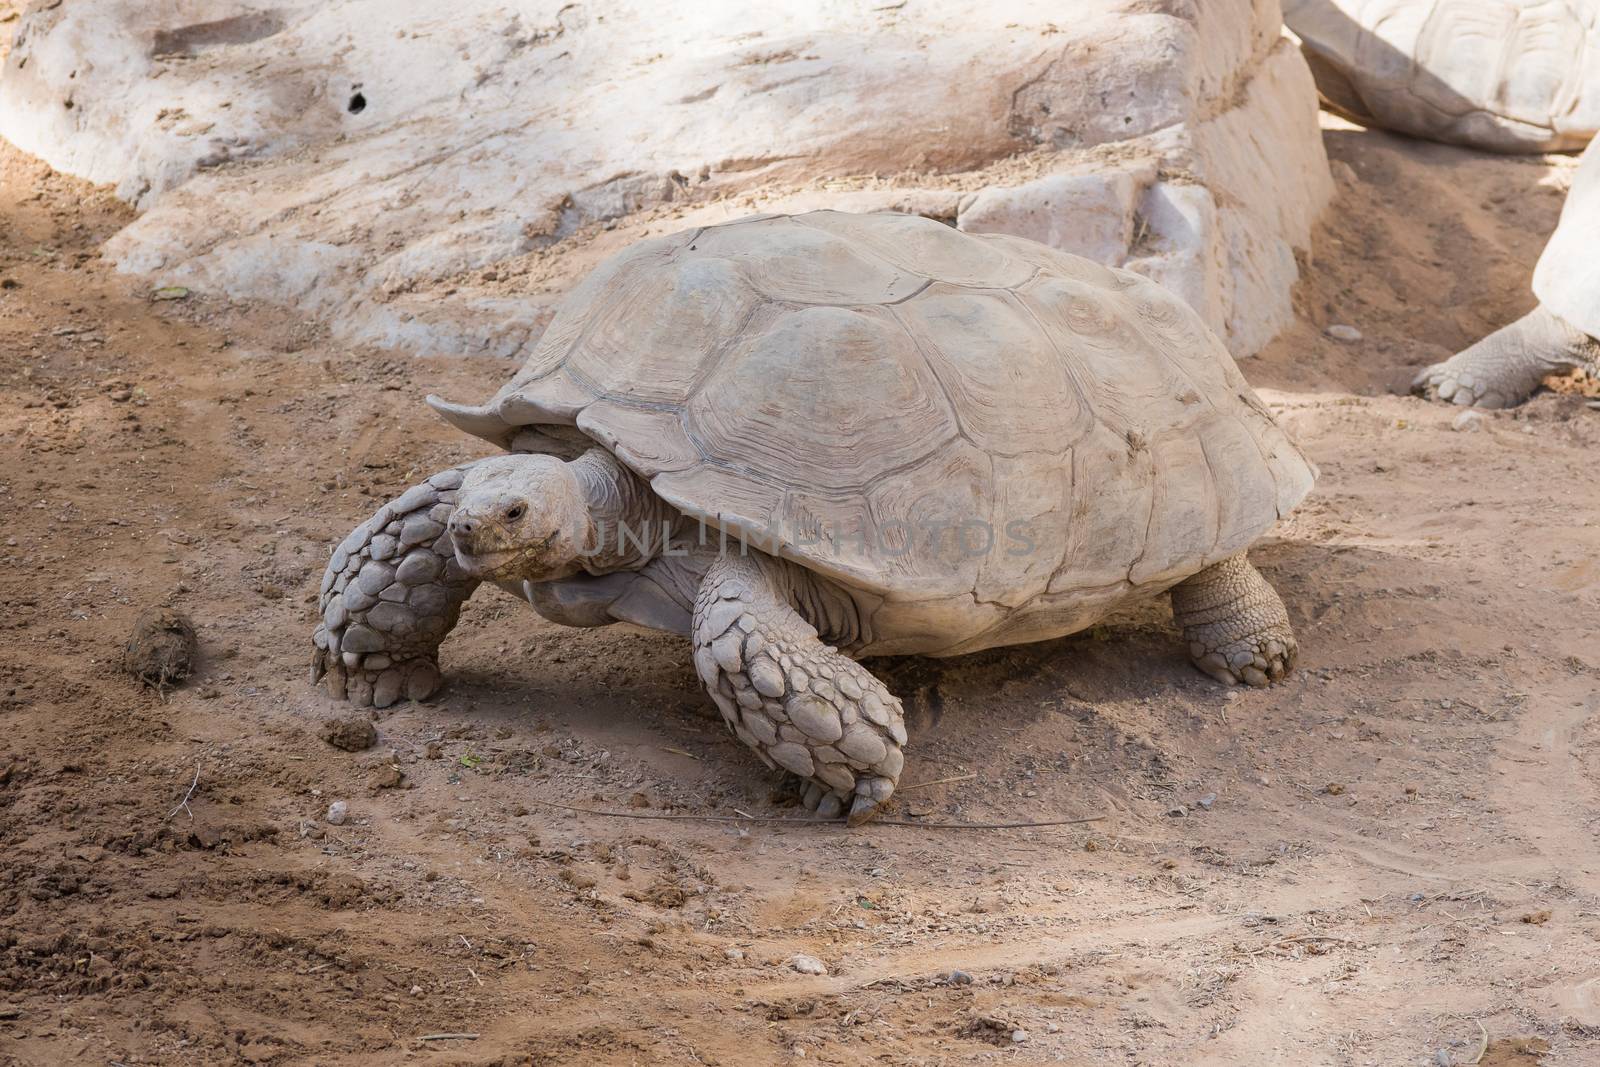 A giant tortoise (Chelonoidis nigra) walks across the desert and slowly showing off its large shell and head.